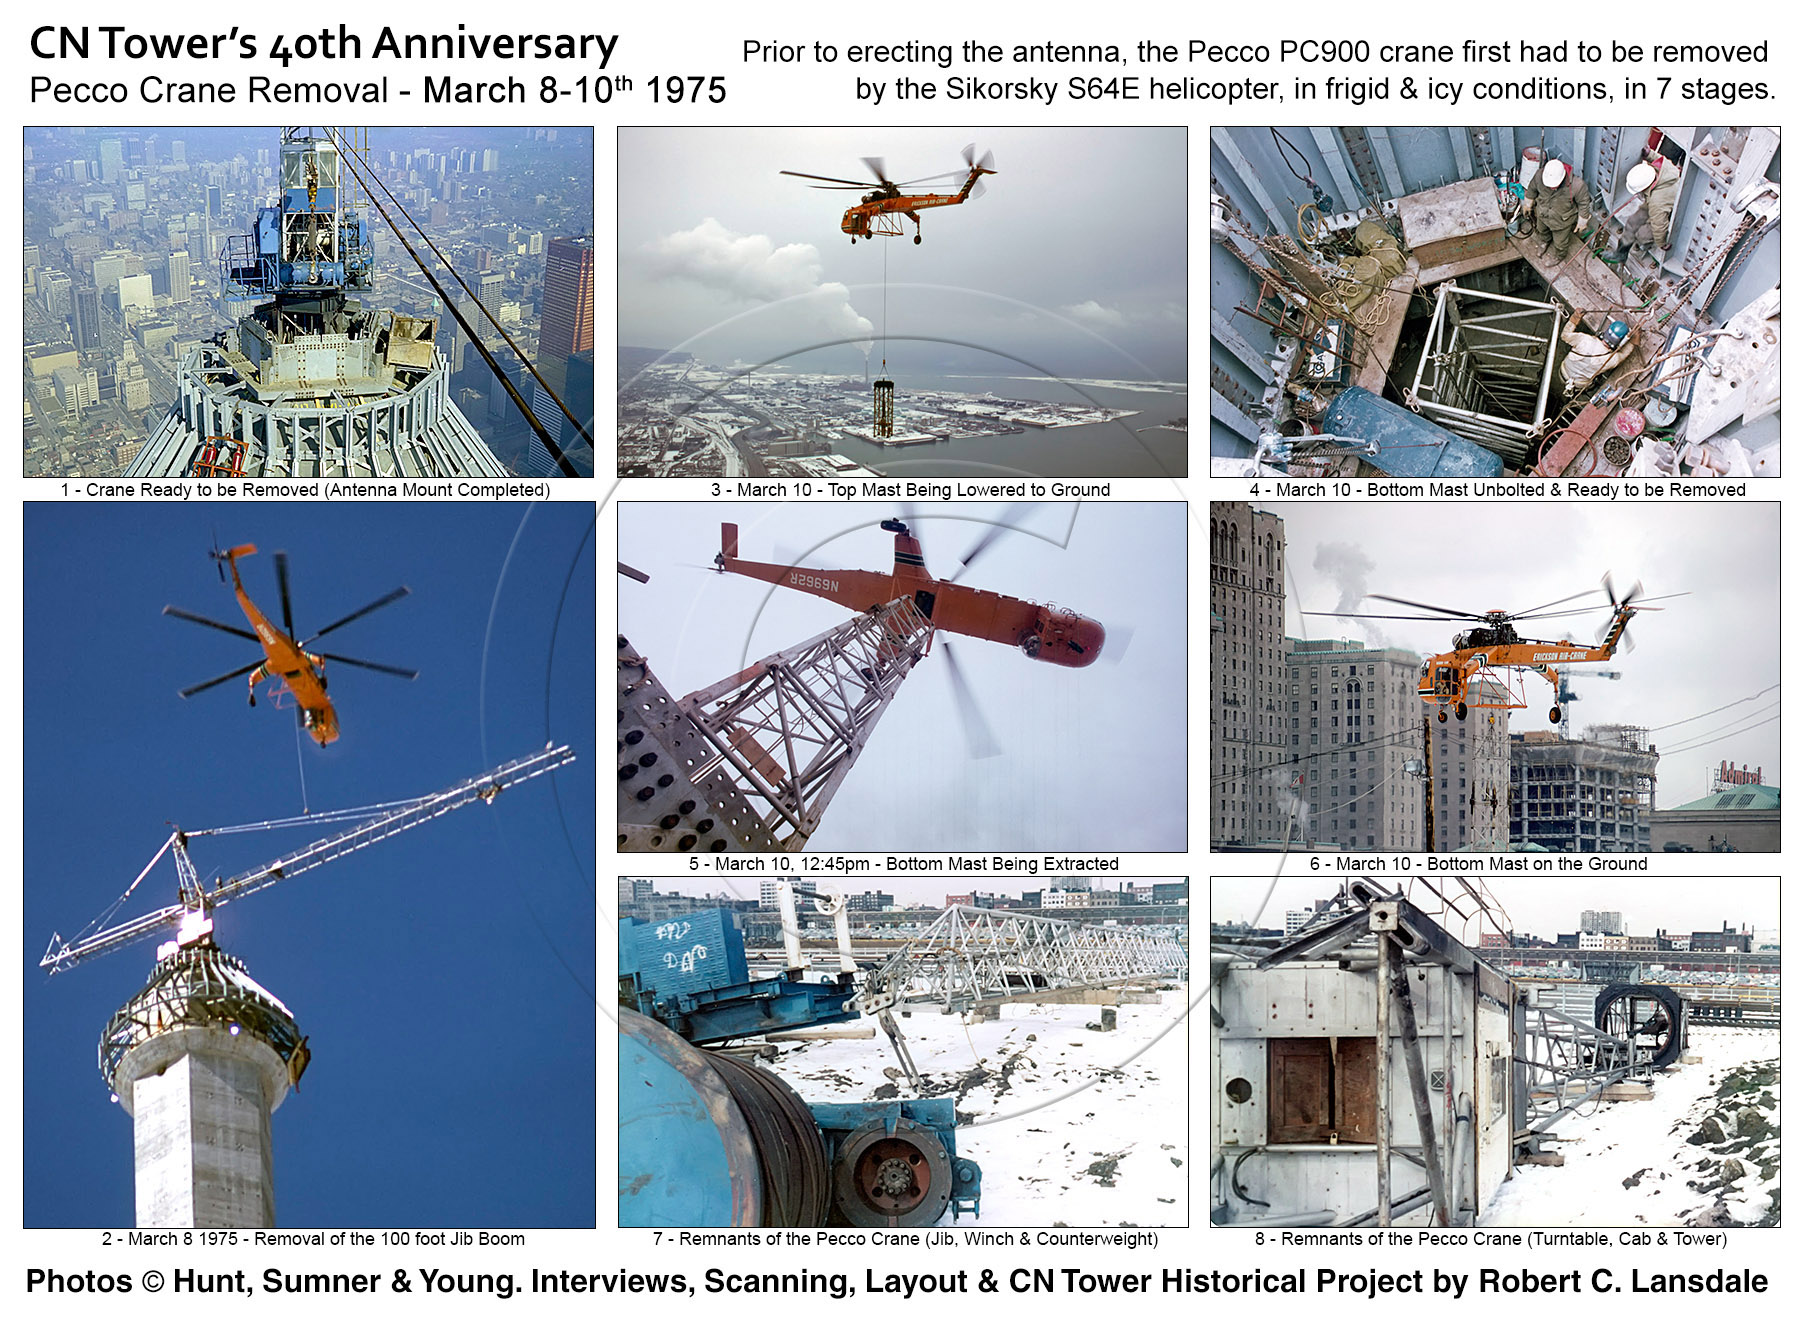 Crane removal via helicopter - March 1975.jpg